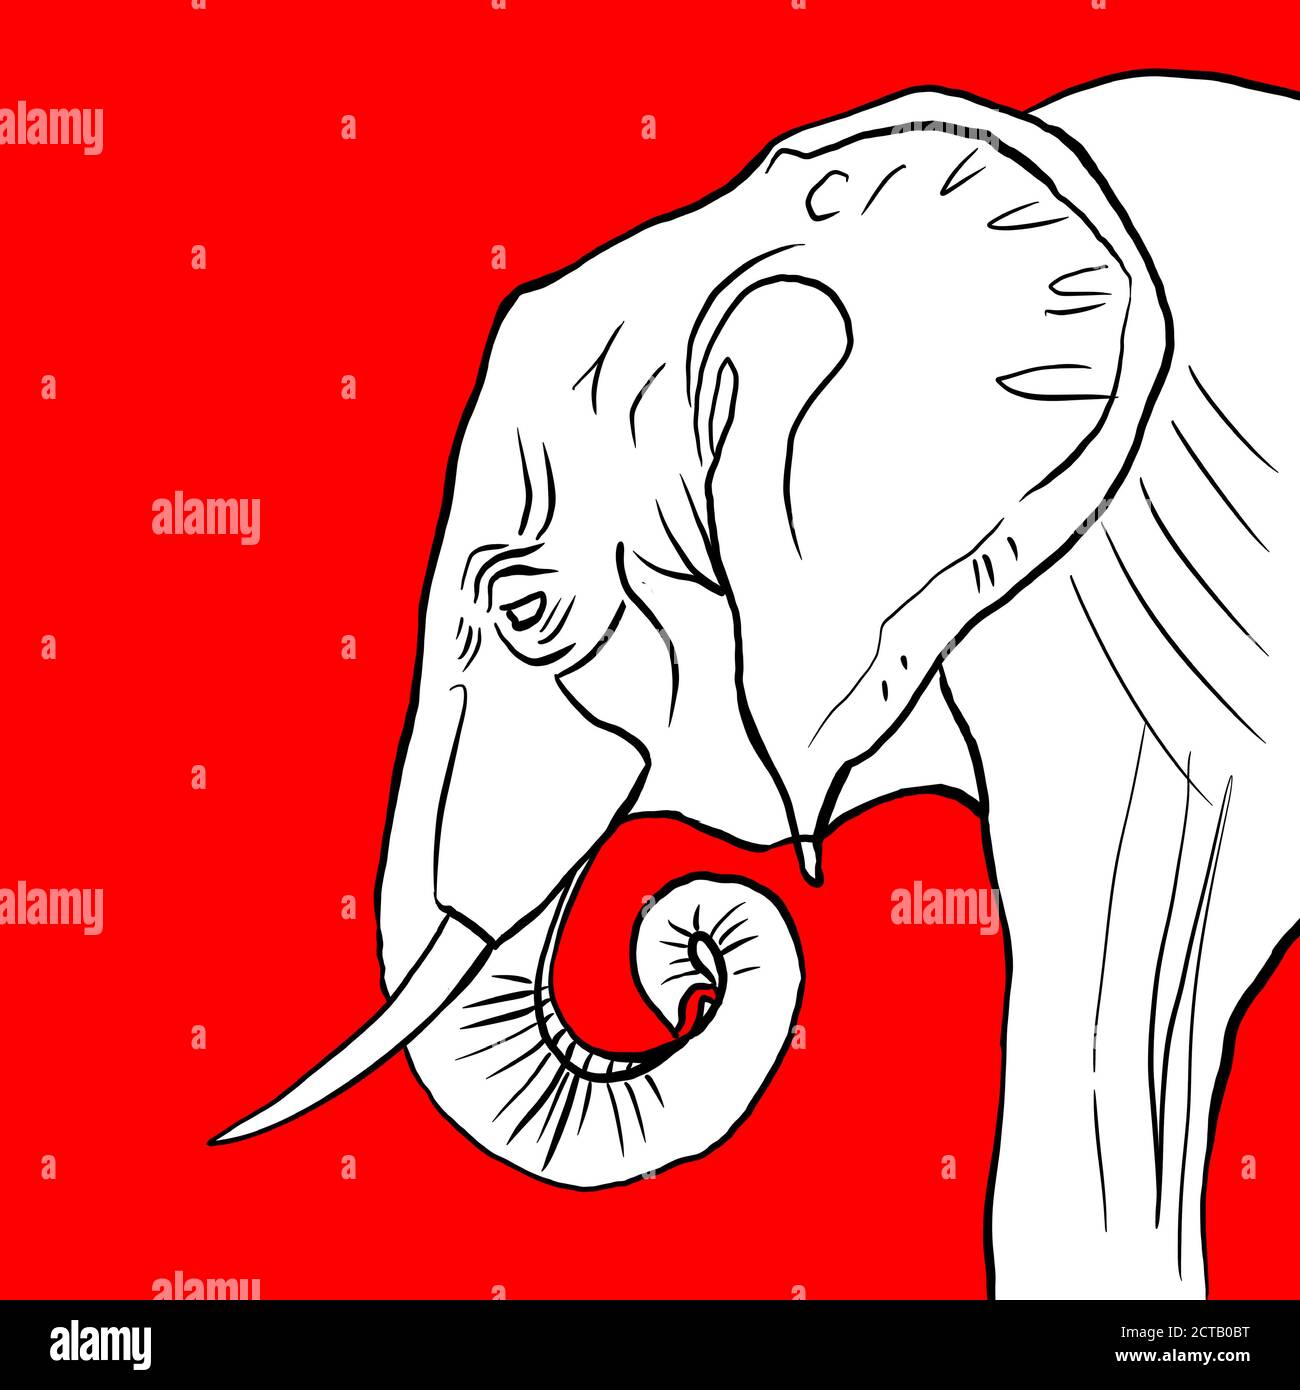 Drawn elephant on a red background. Elections 2020. Republican party. Stock Photo